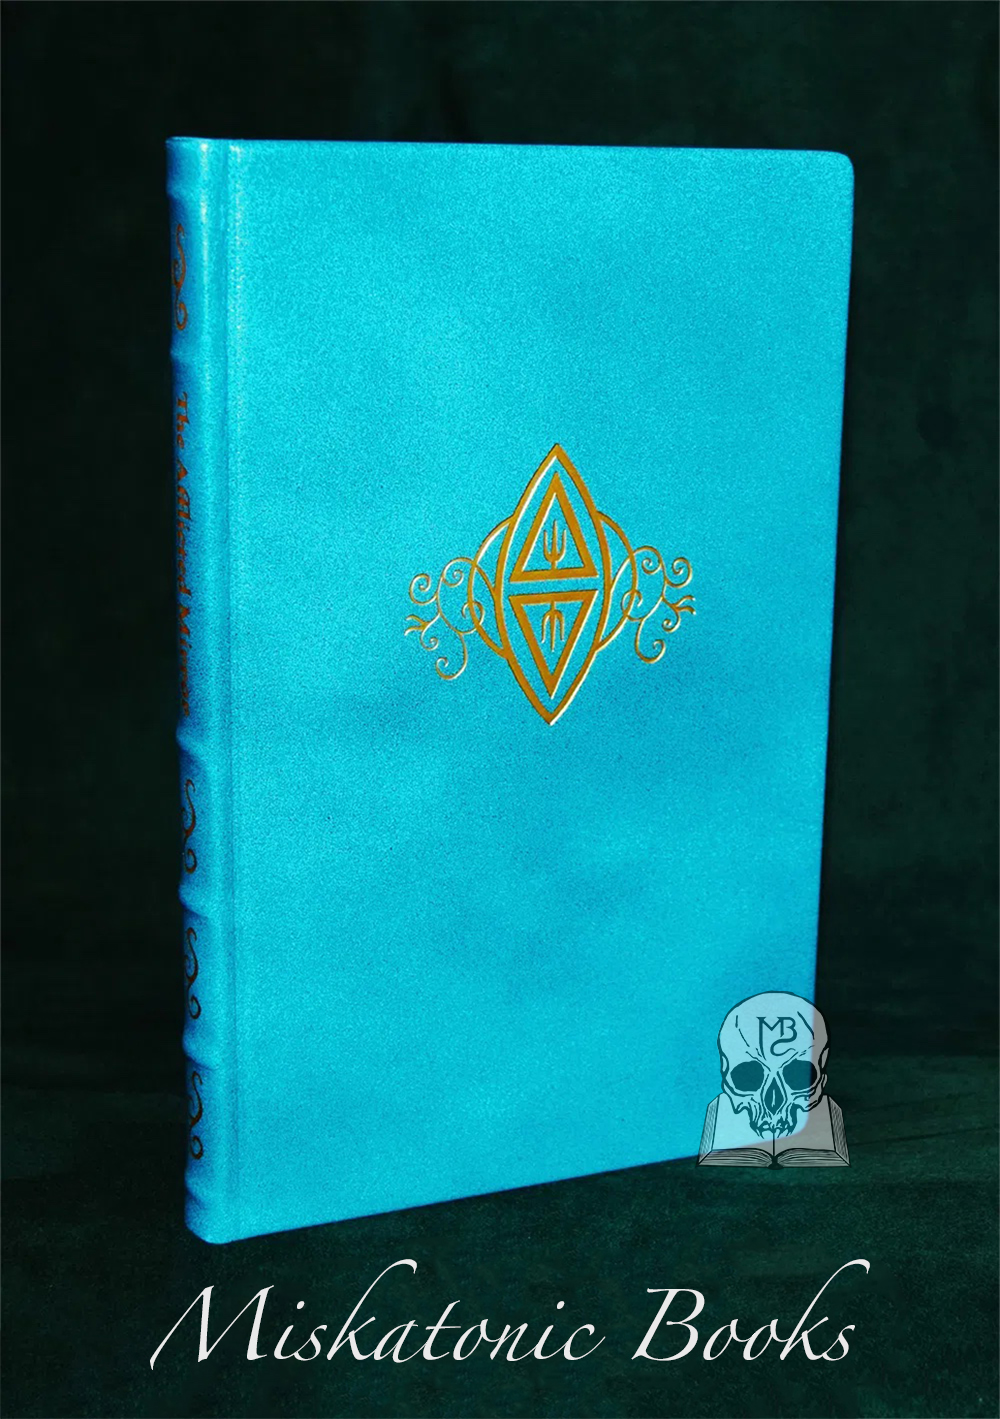 THE AFFLICTED MIRROR: A Study of Ordeals and the Making of Compacts by Peter Hamilton-Giles - Special Turquoise Goatskin Edition